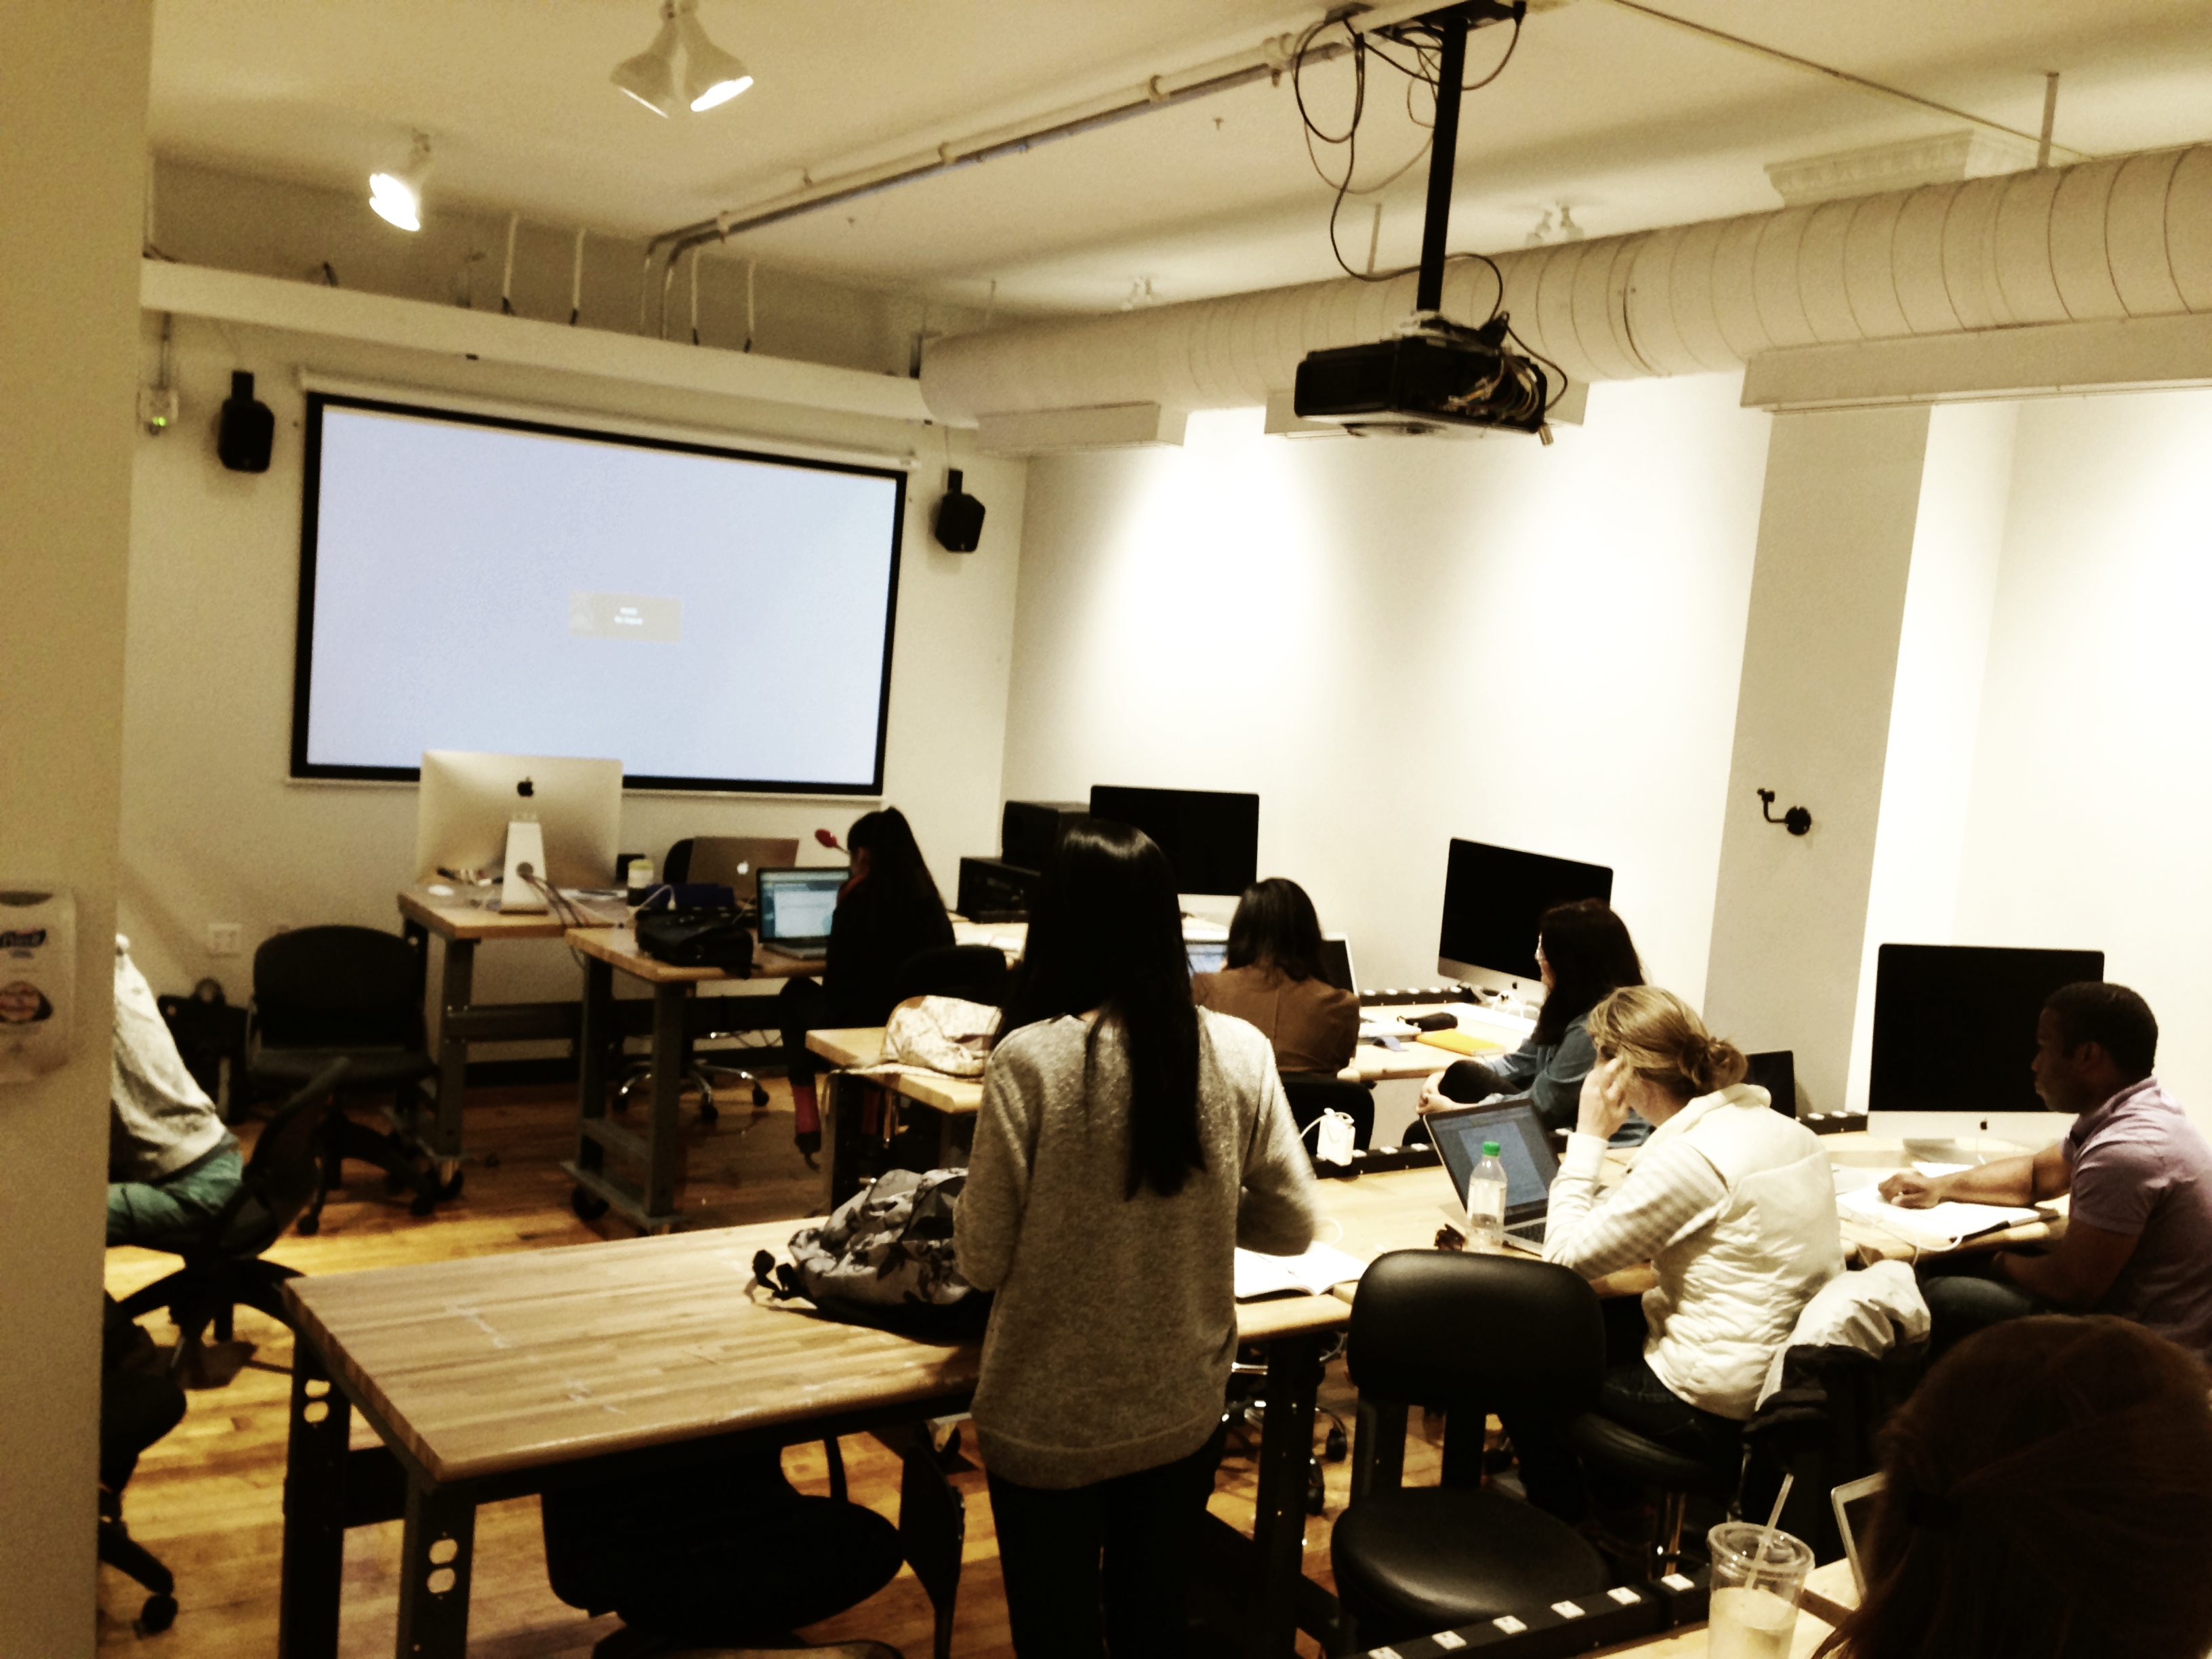 wide shot of my classroom at RISD: projector screen in front, rows of students at high desks with laptops